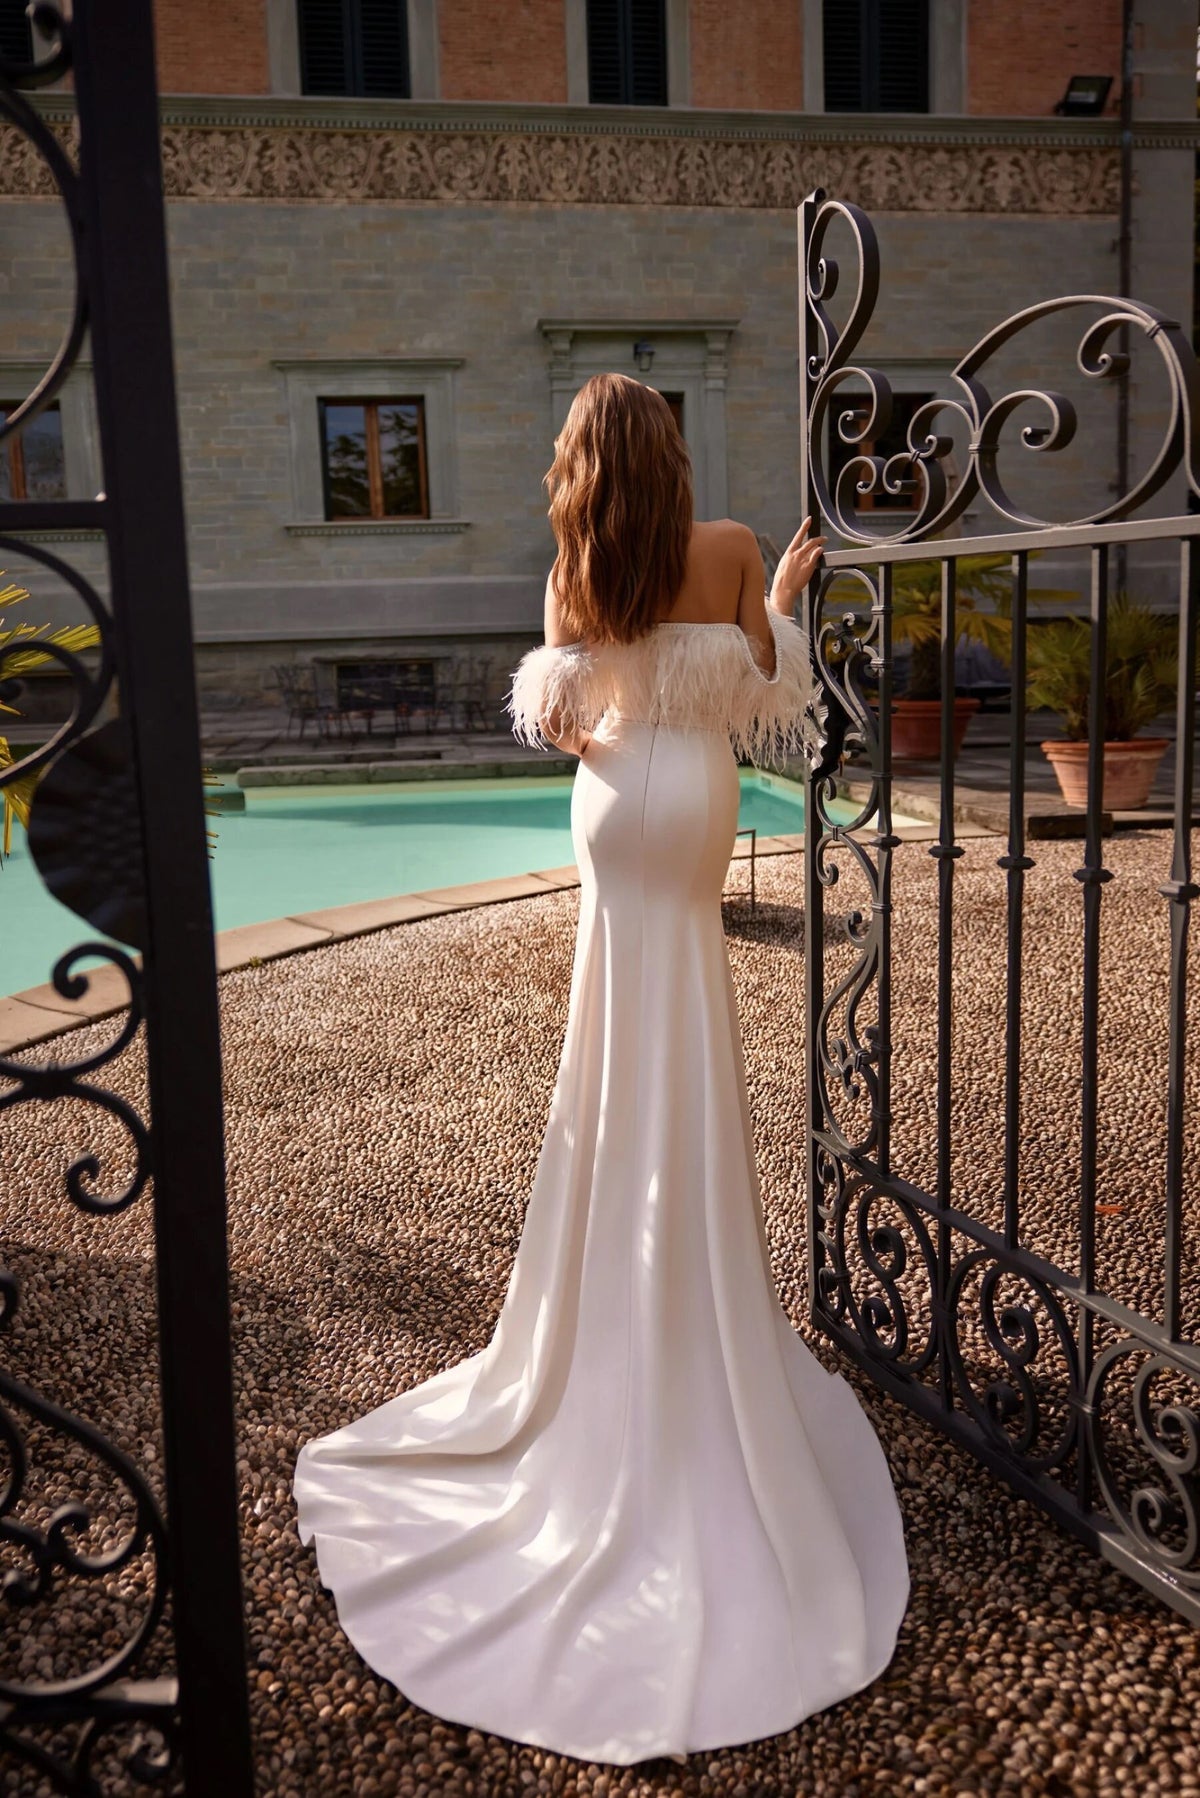 Modern Fit and Flare Wedding Dress Off the Shoulder Feathers Sweetheart Neckline Open Back Side Slit Fitted Bridal Gown Unique Modern Design